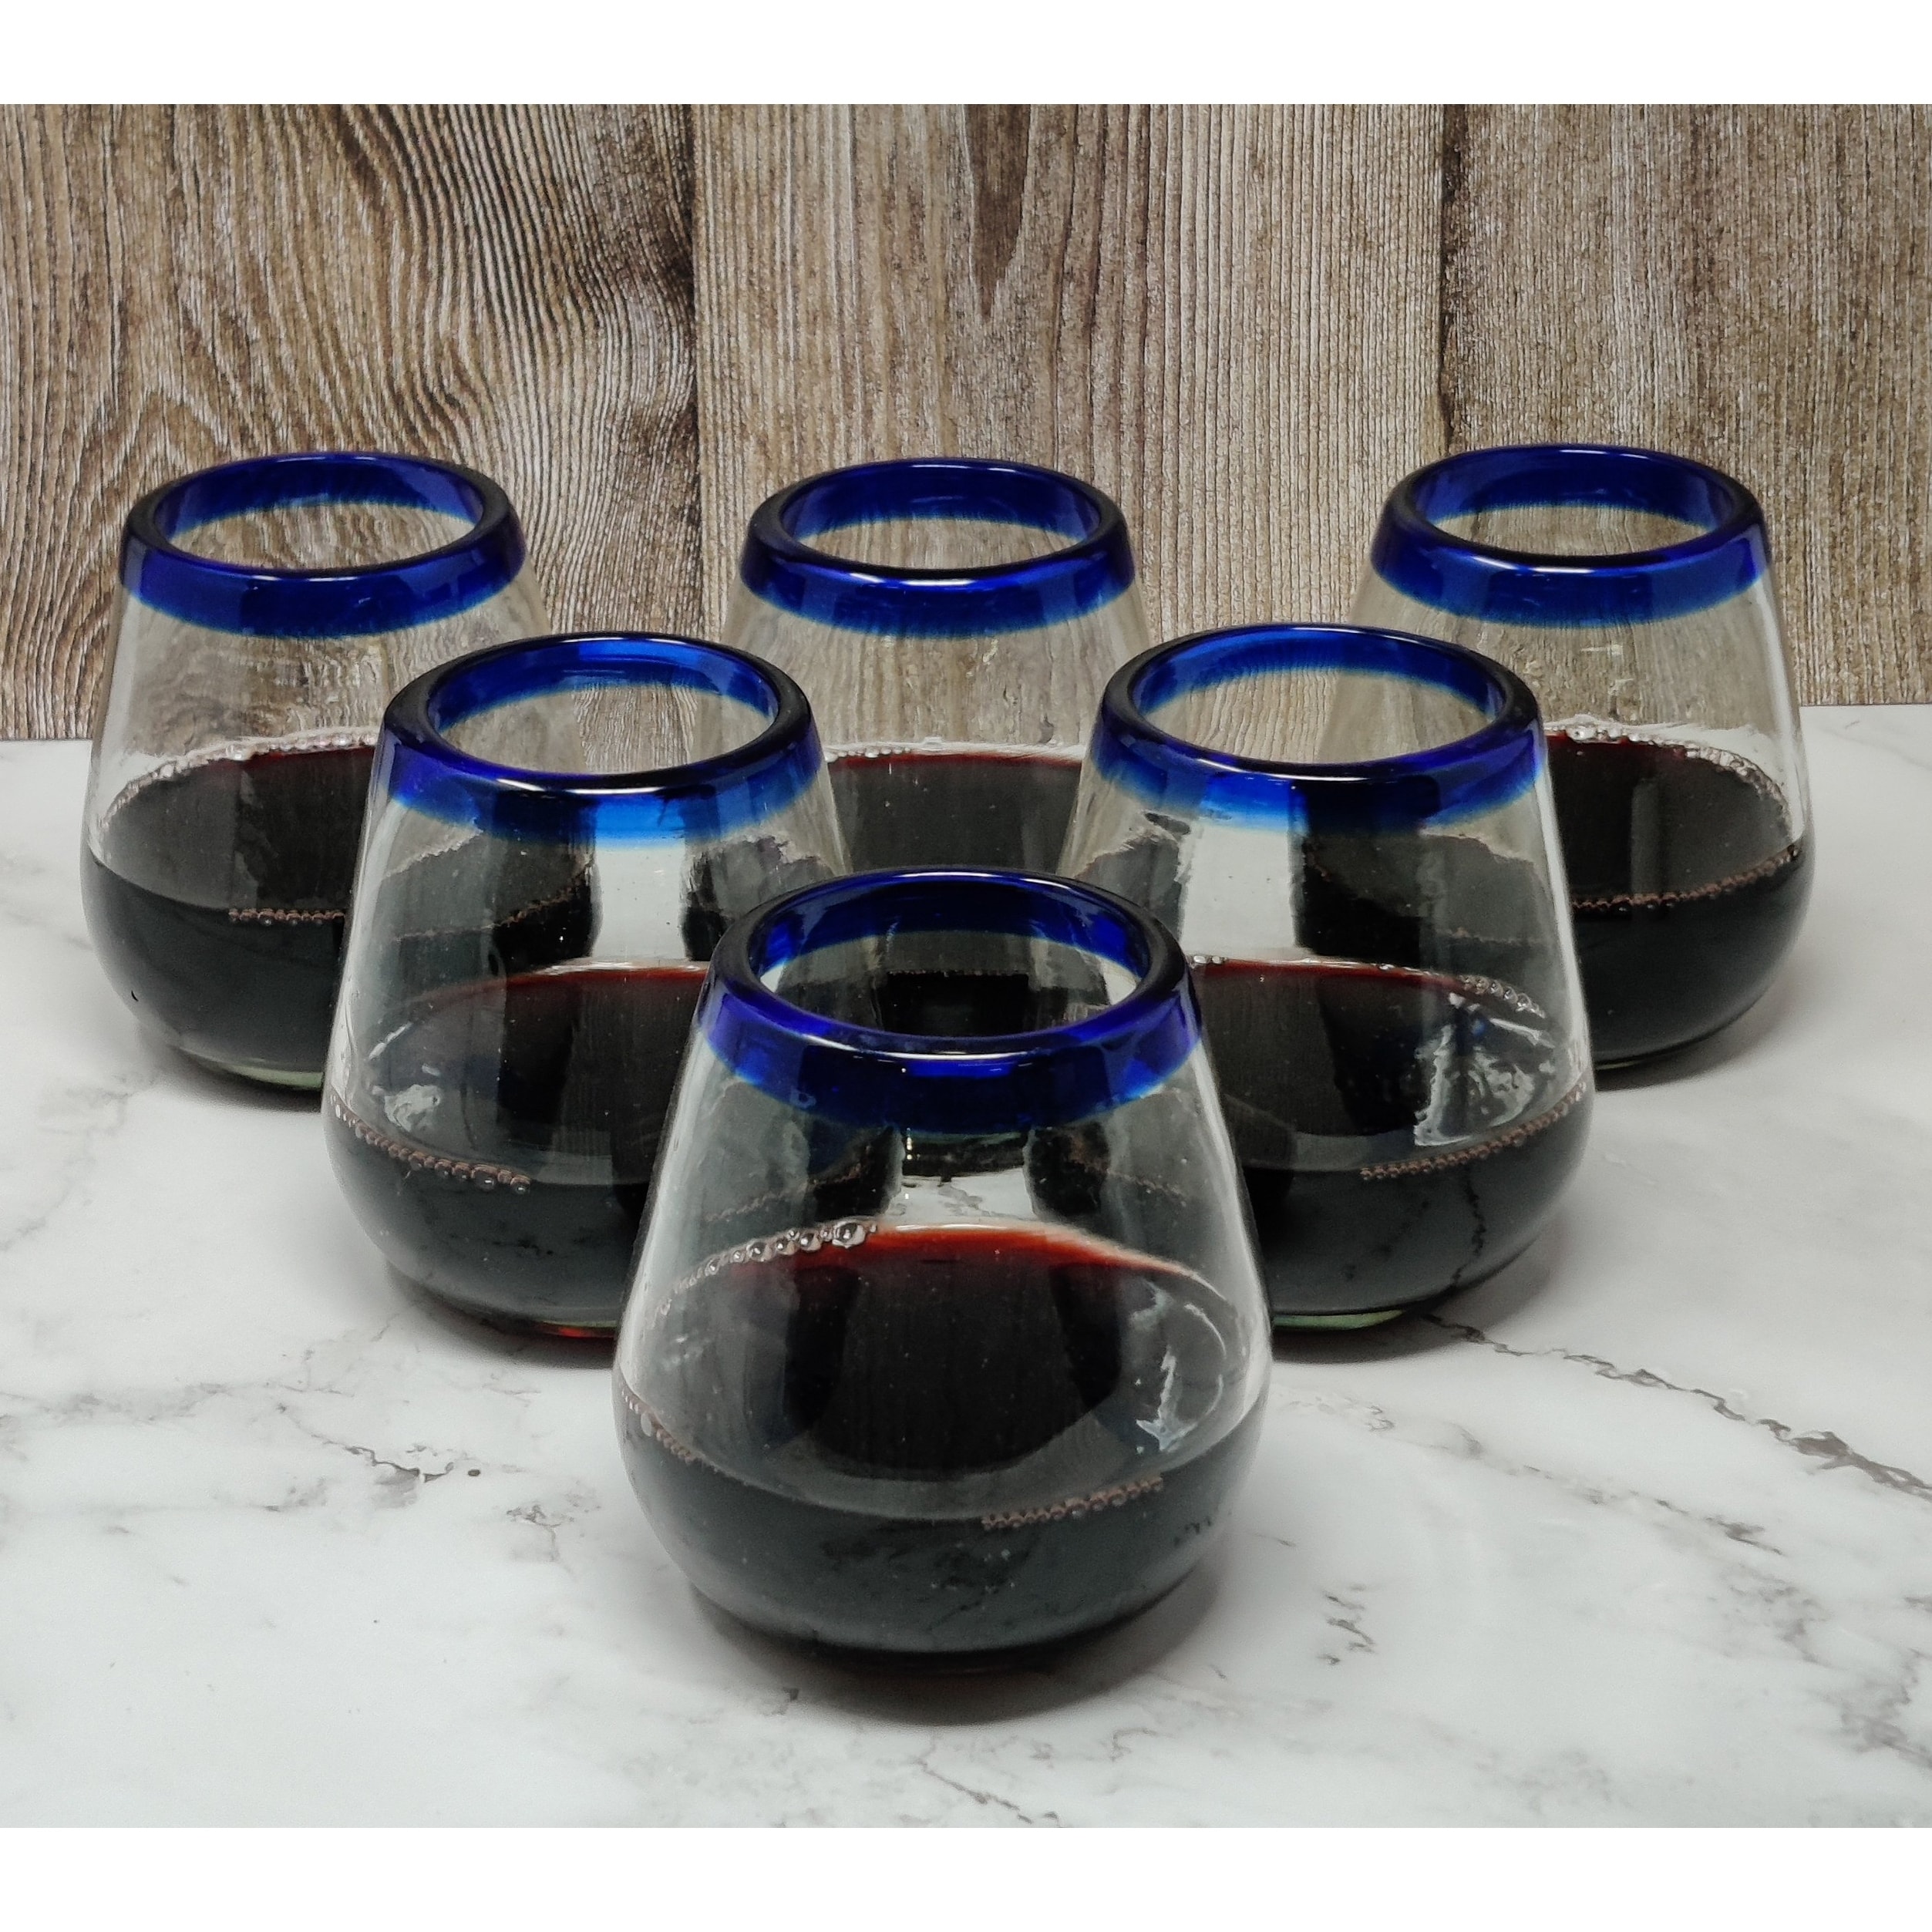 https://ak1.ostkcdn.com/images/products/is/images/direct/60f4541d9b8b4759ad2b06920f14fa71e2c4b268/Hand-Blown-Mexican-Stemless-Wine-Glasses---Set-of-6-Glasses-with-Cobalt-Blue-Rims-%2815-oz%29.jpg